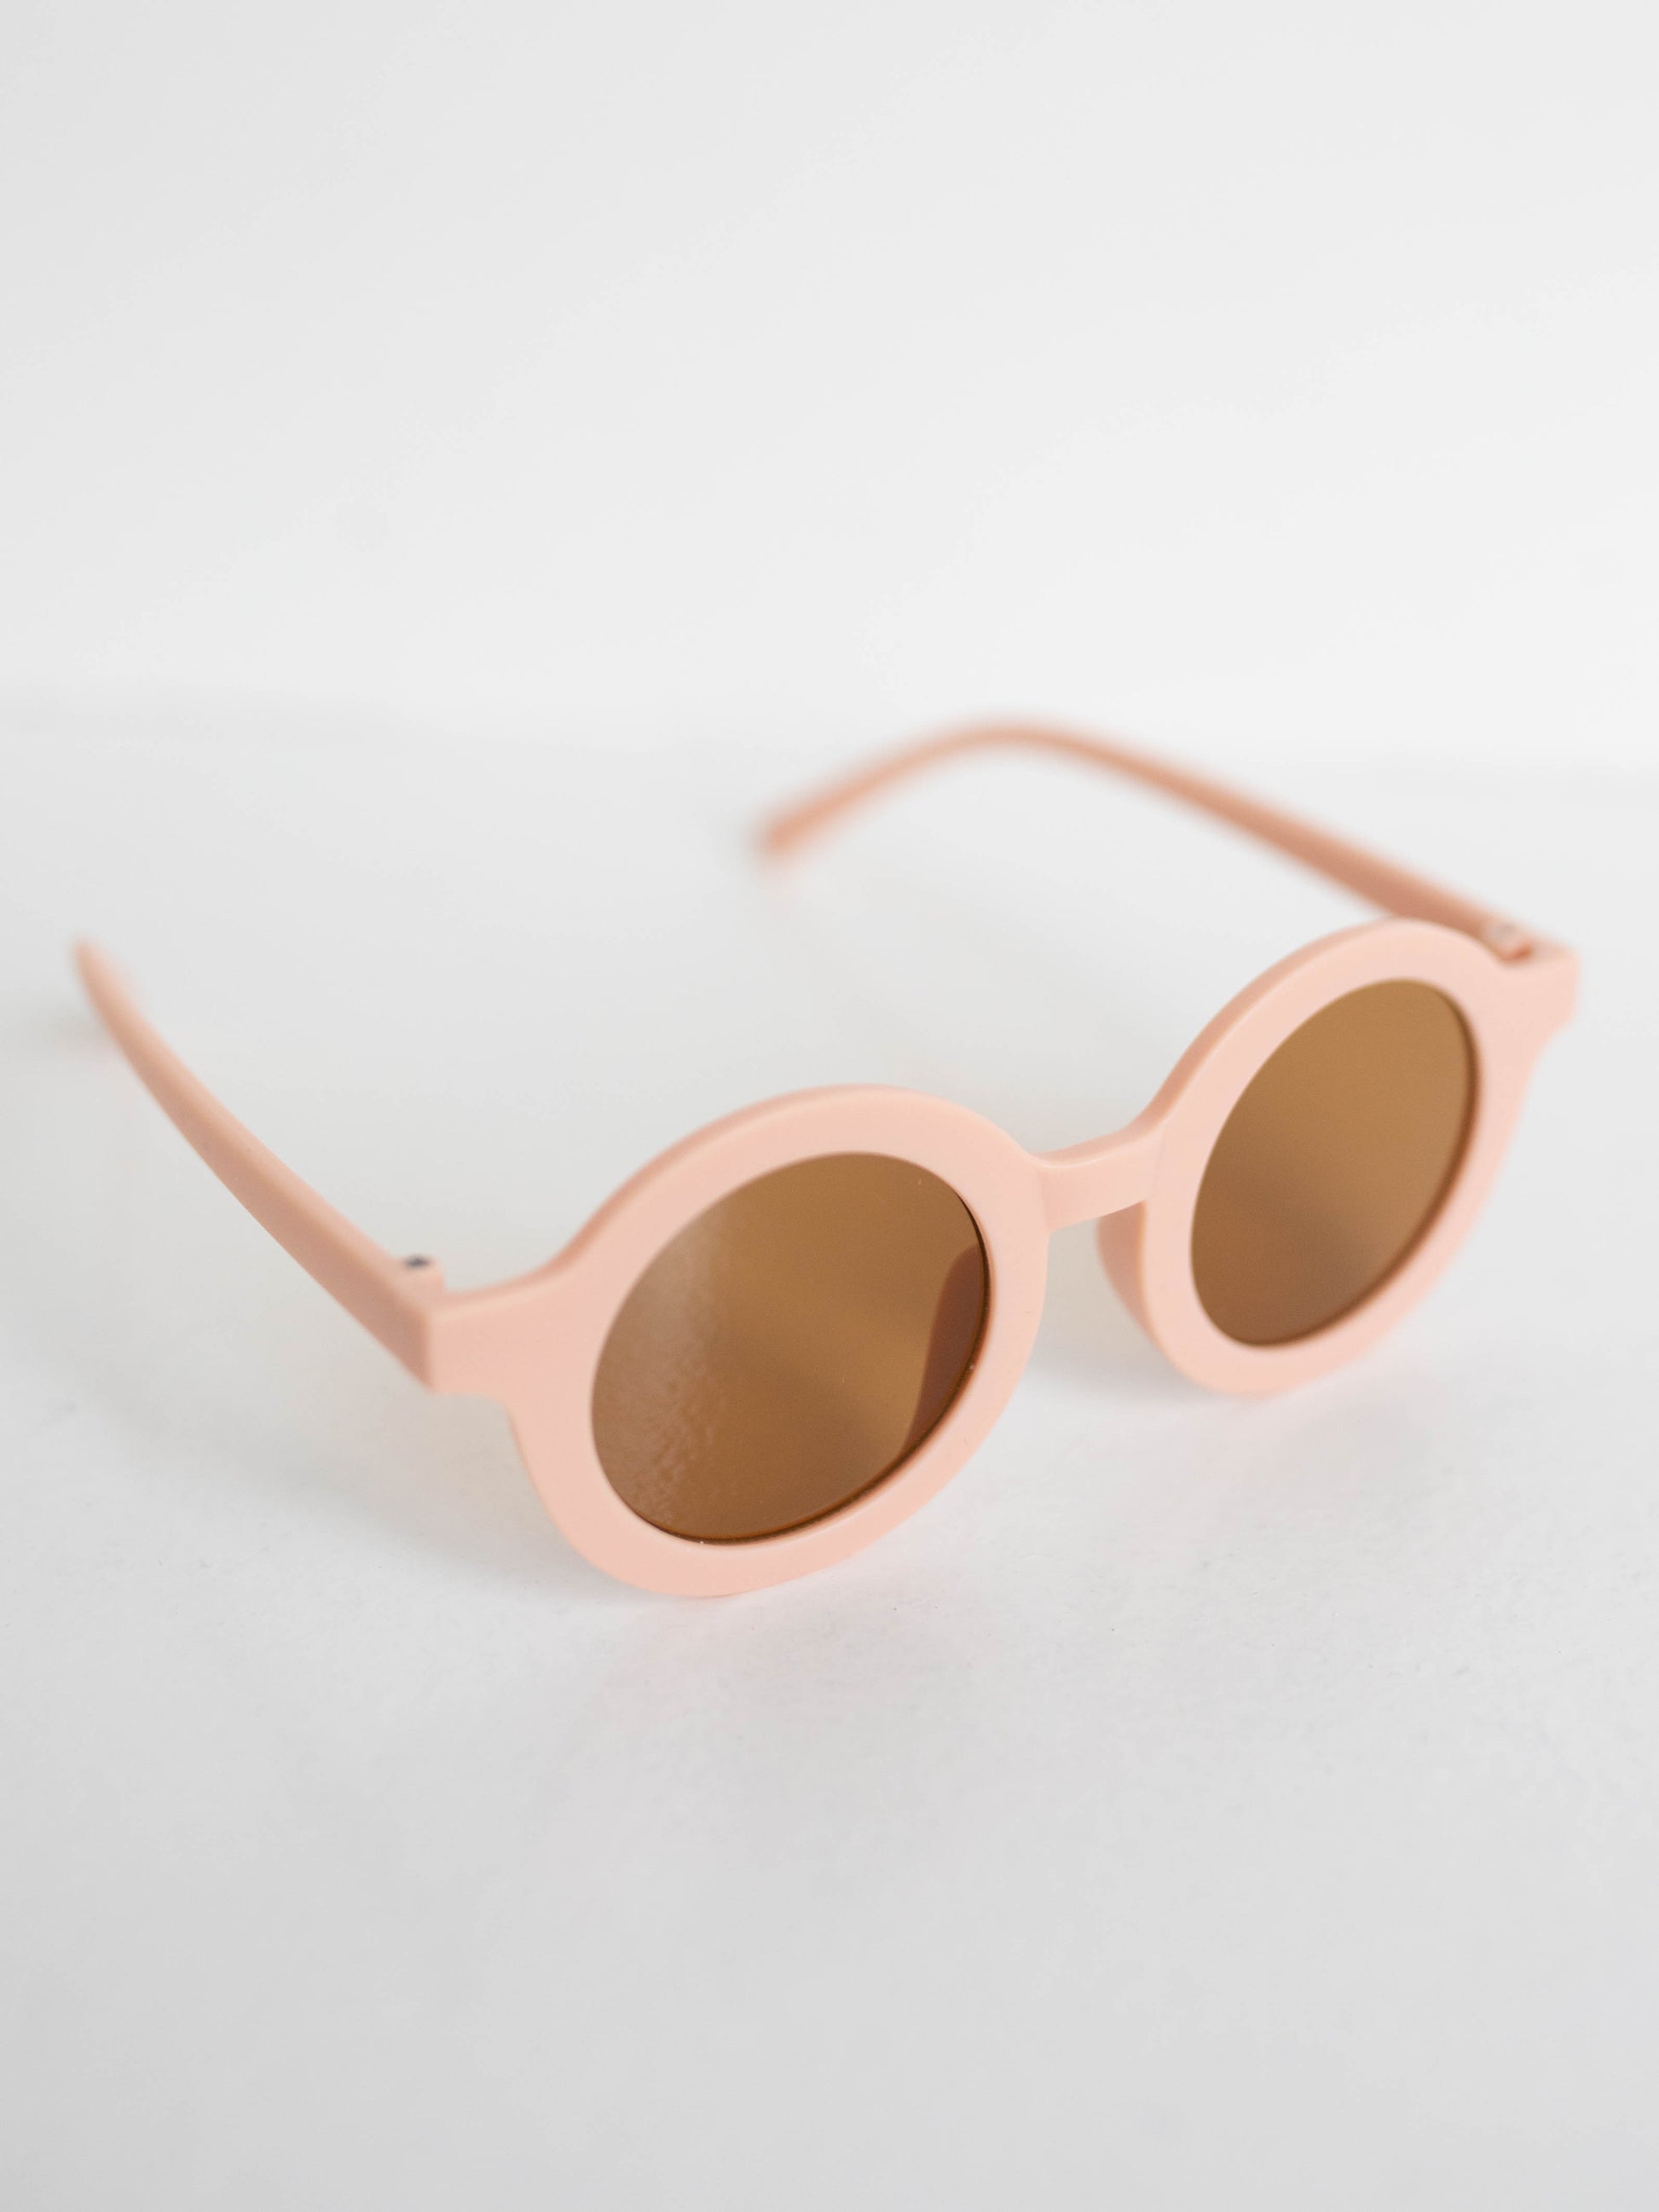 Children's Play Sunglasses | Best Kid Sunglasses | Kylo and Co.